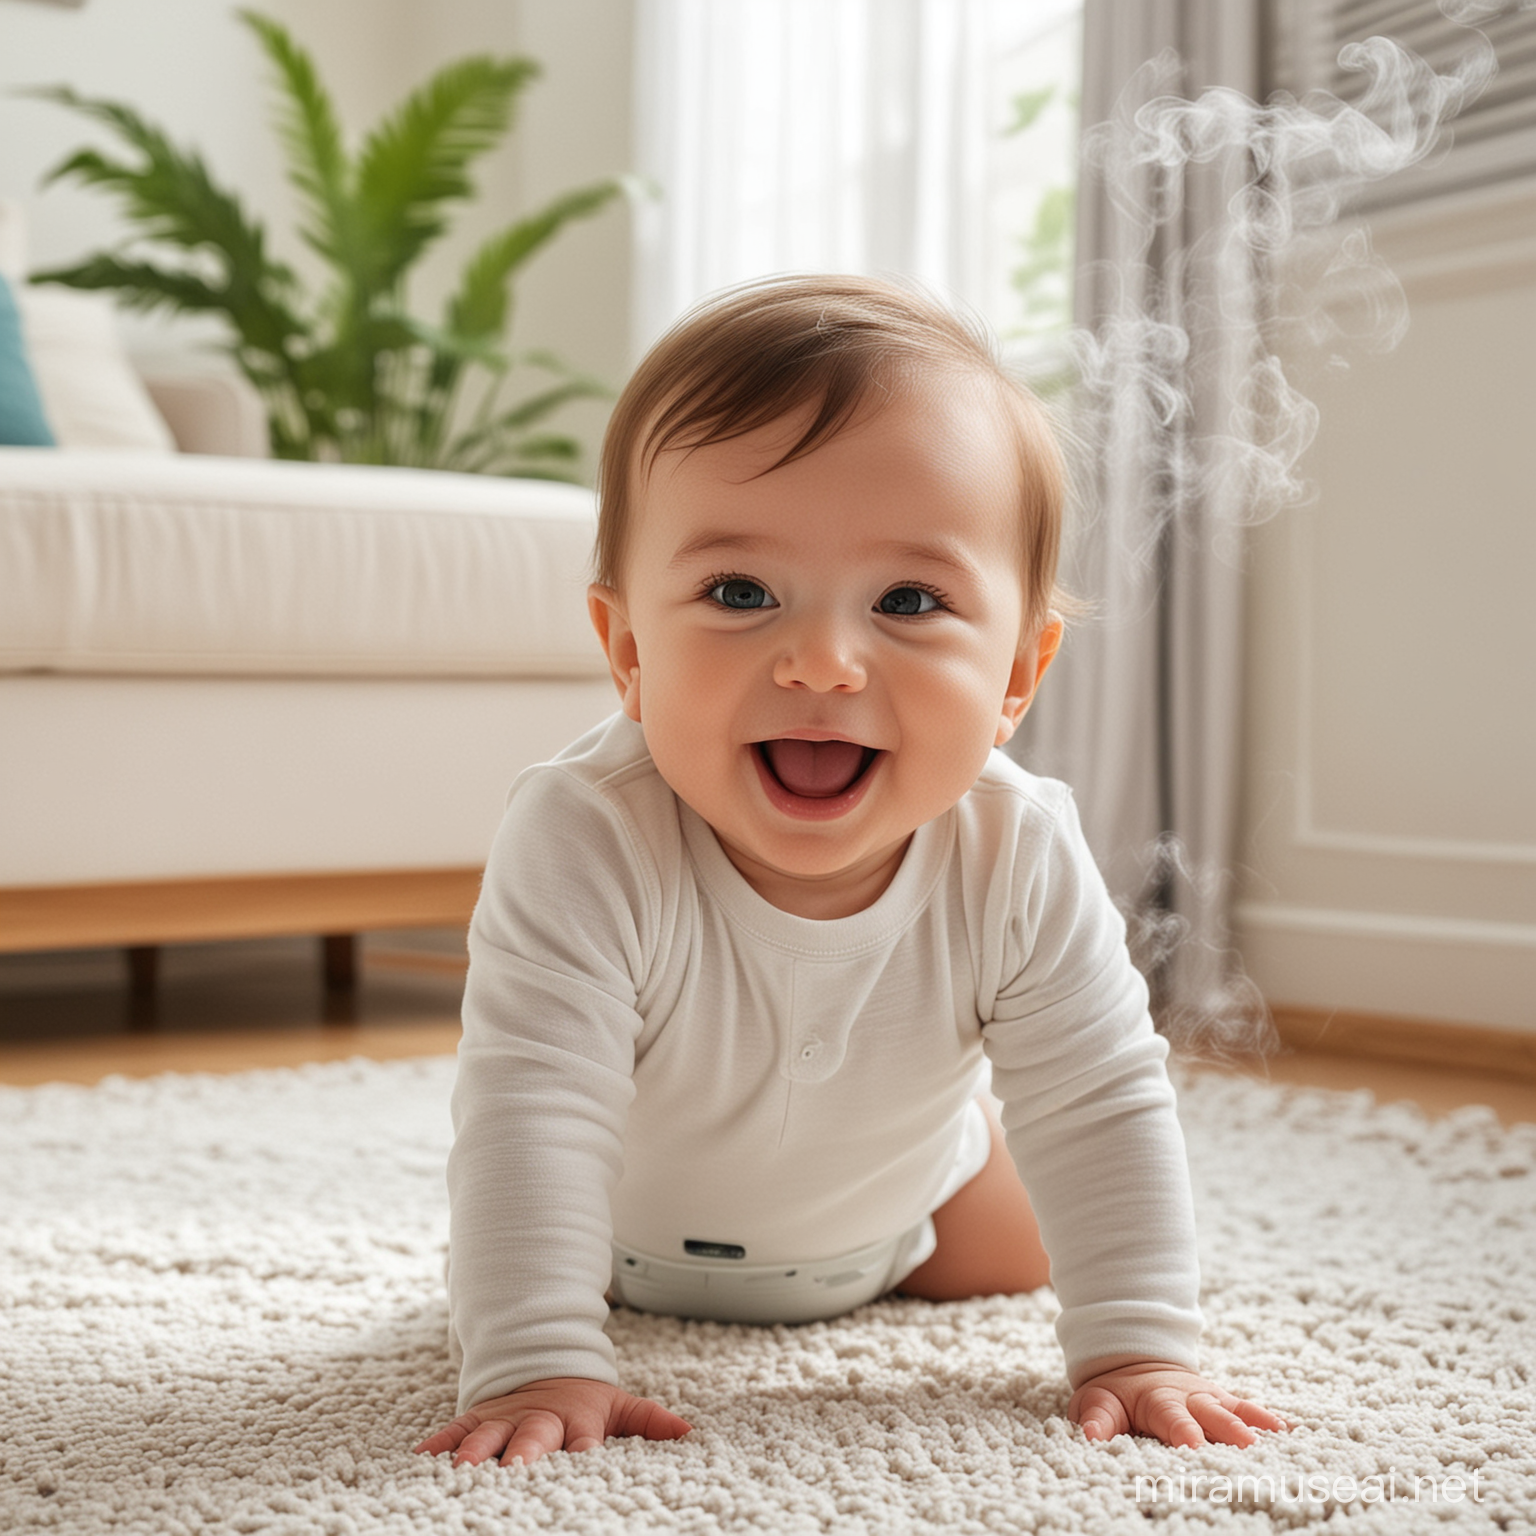 a happy baby enjoying clean and fresh air produced by a home air purifier device